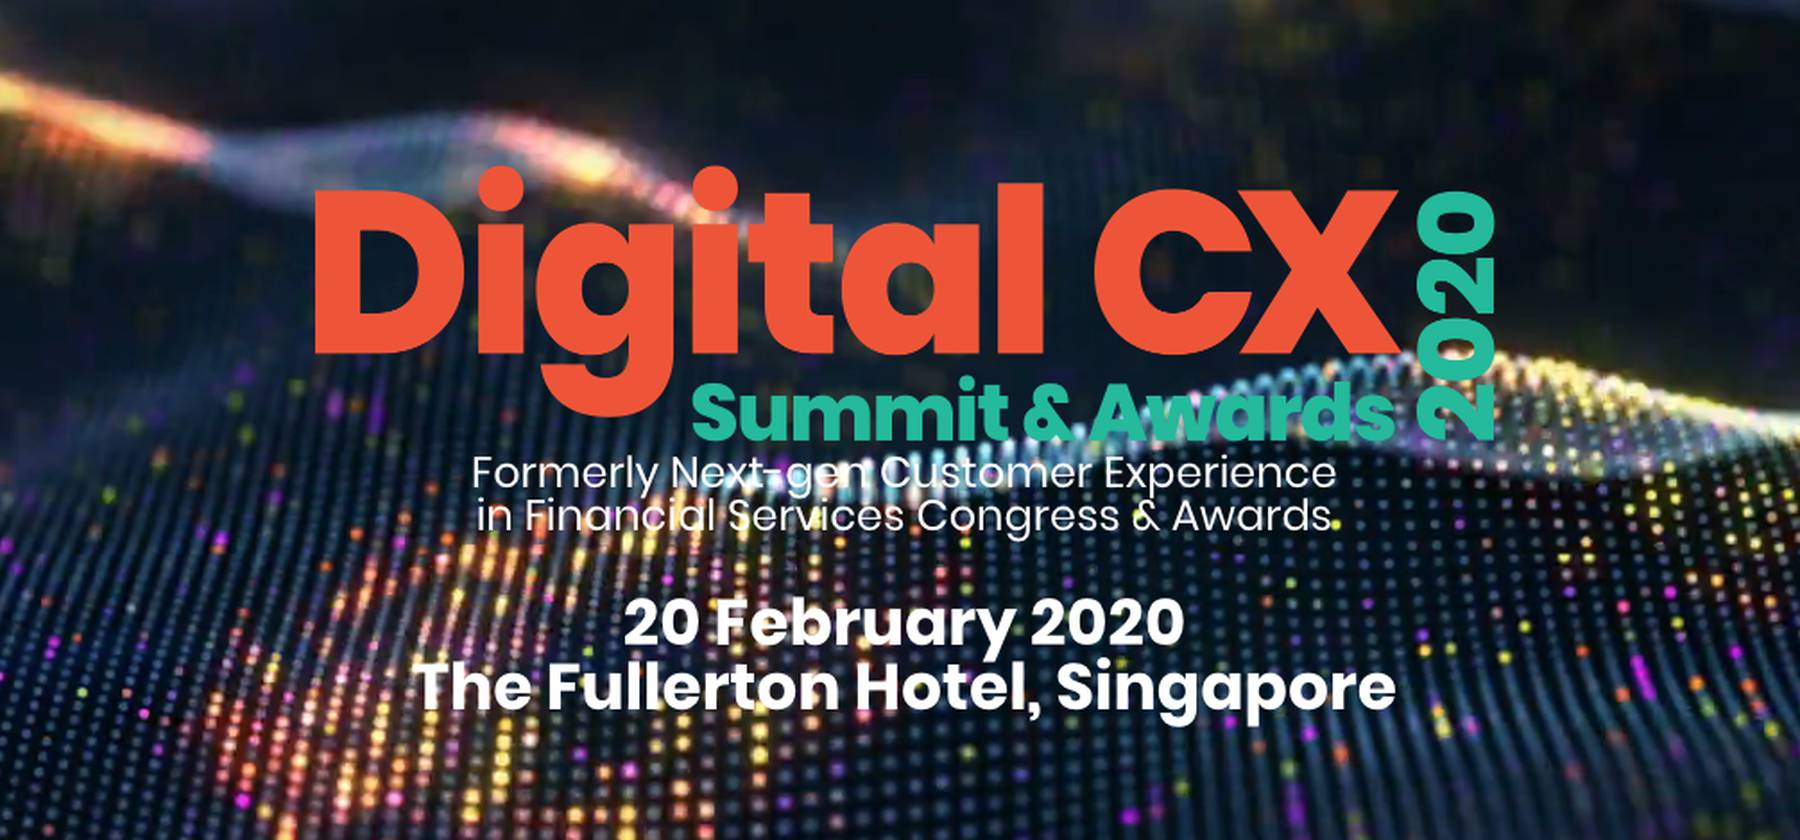 The Digital CX Summit and Awards Singapore 2020